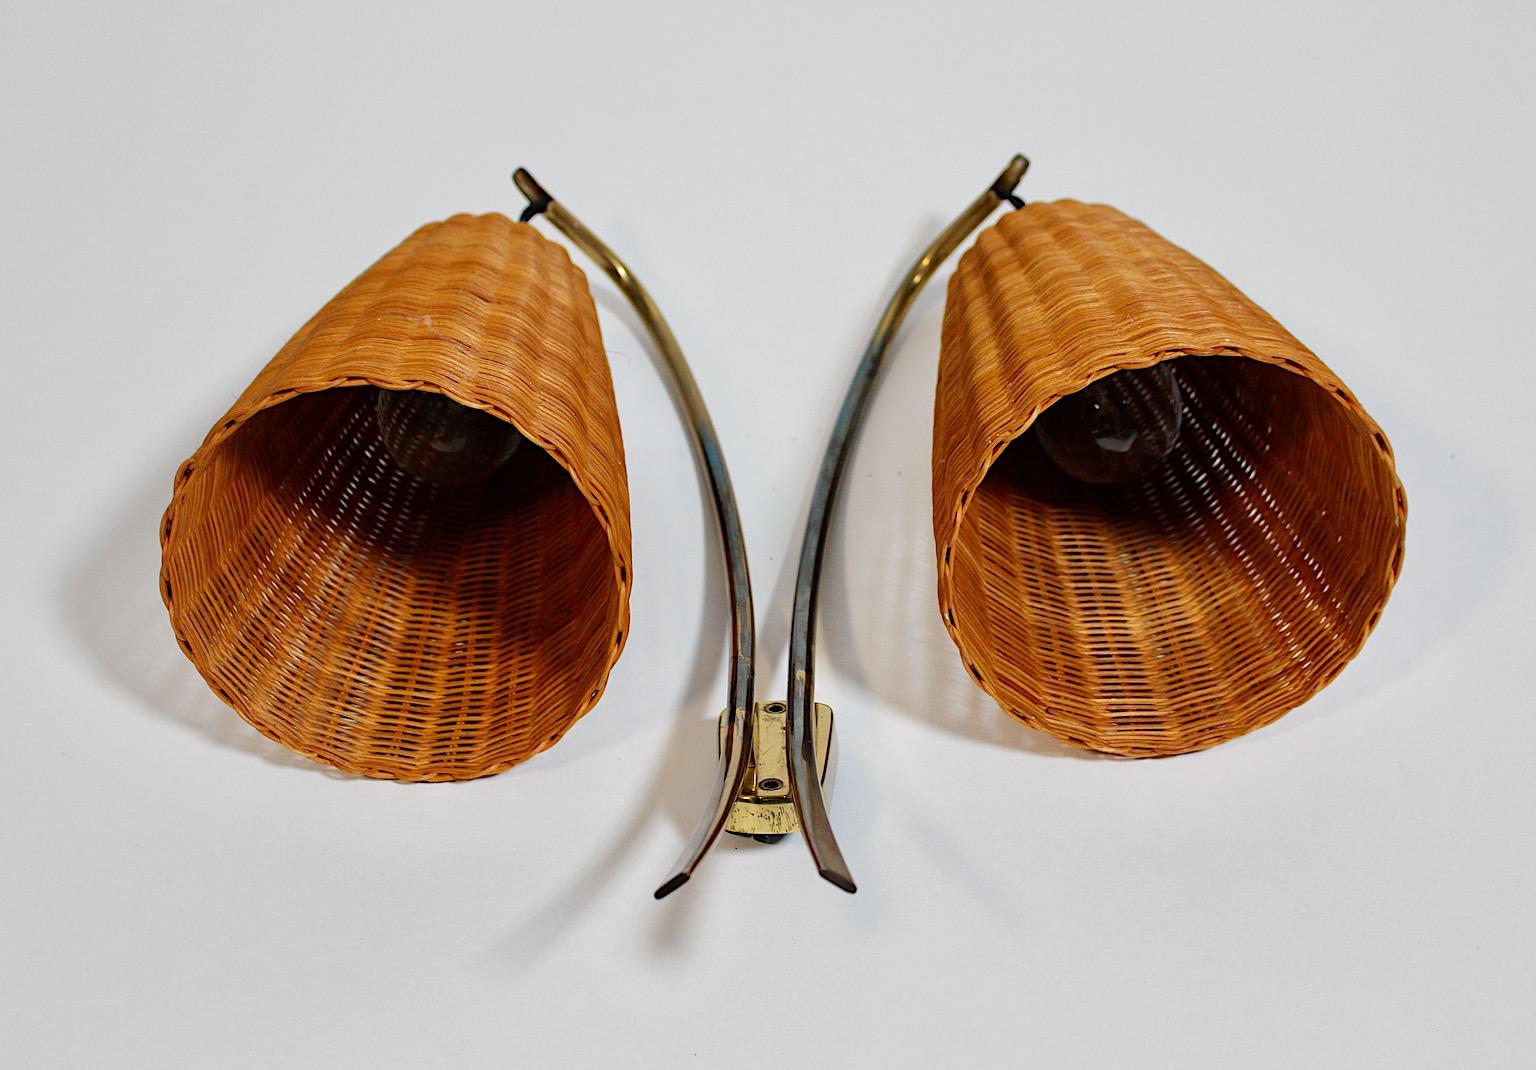 Mid-Century Modern vintage organic wall light or sconce by Kalmar from rattan and brass 1950s Vienna.
A stunning wall light by Kalmar from brass and rattan network.
This sconce shows two E 27 sockets and are rewired.
The sconce is in good